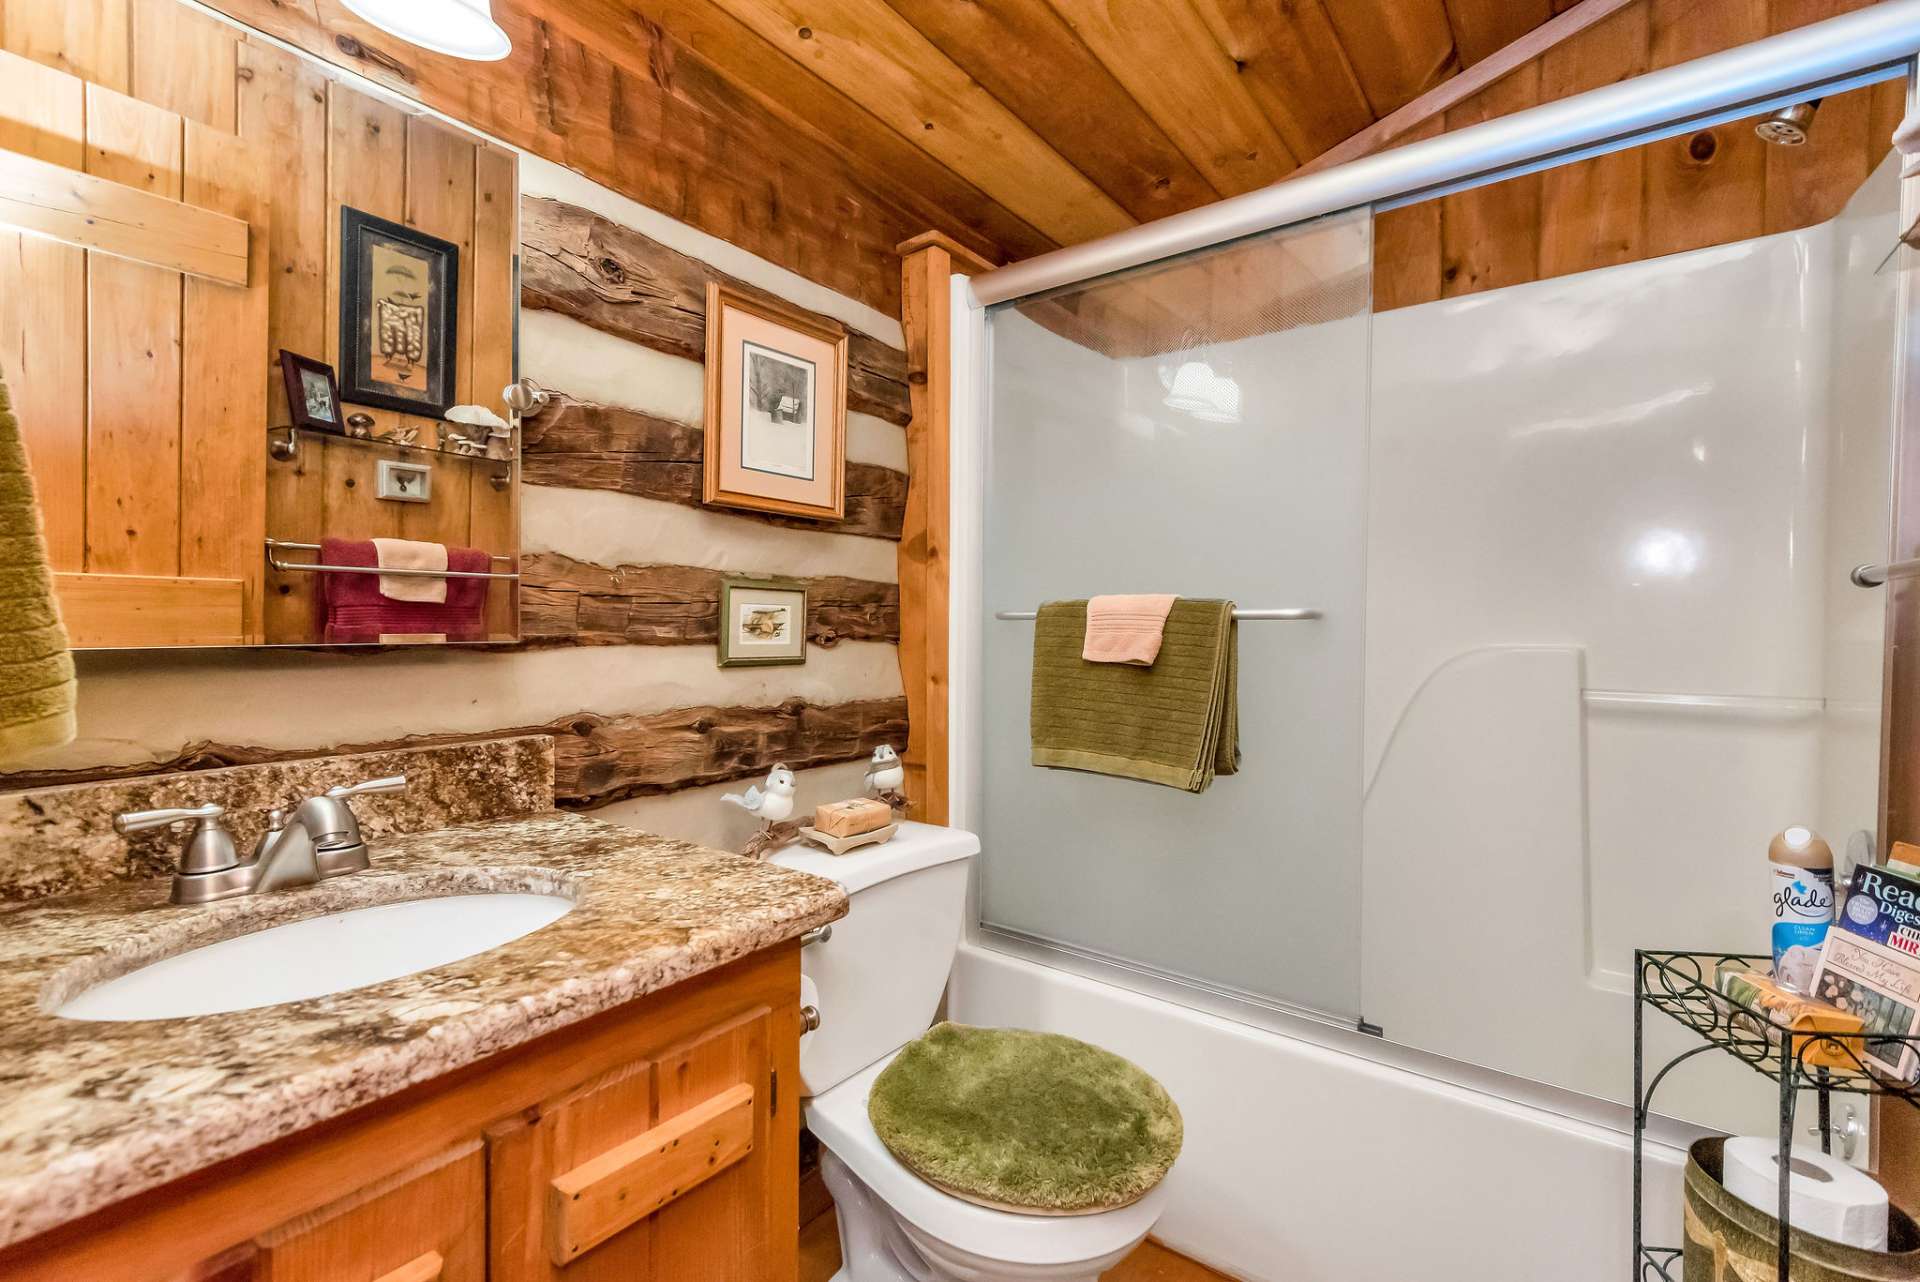 Family and friends will appreciate the full guest bath accommodations with granite counter-tops.